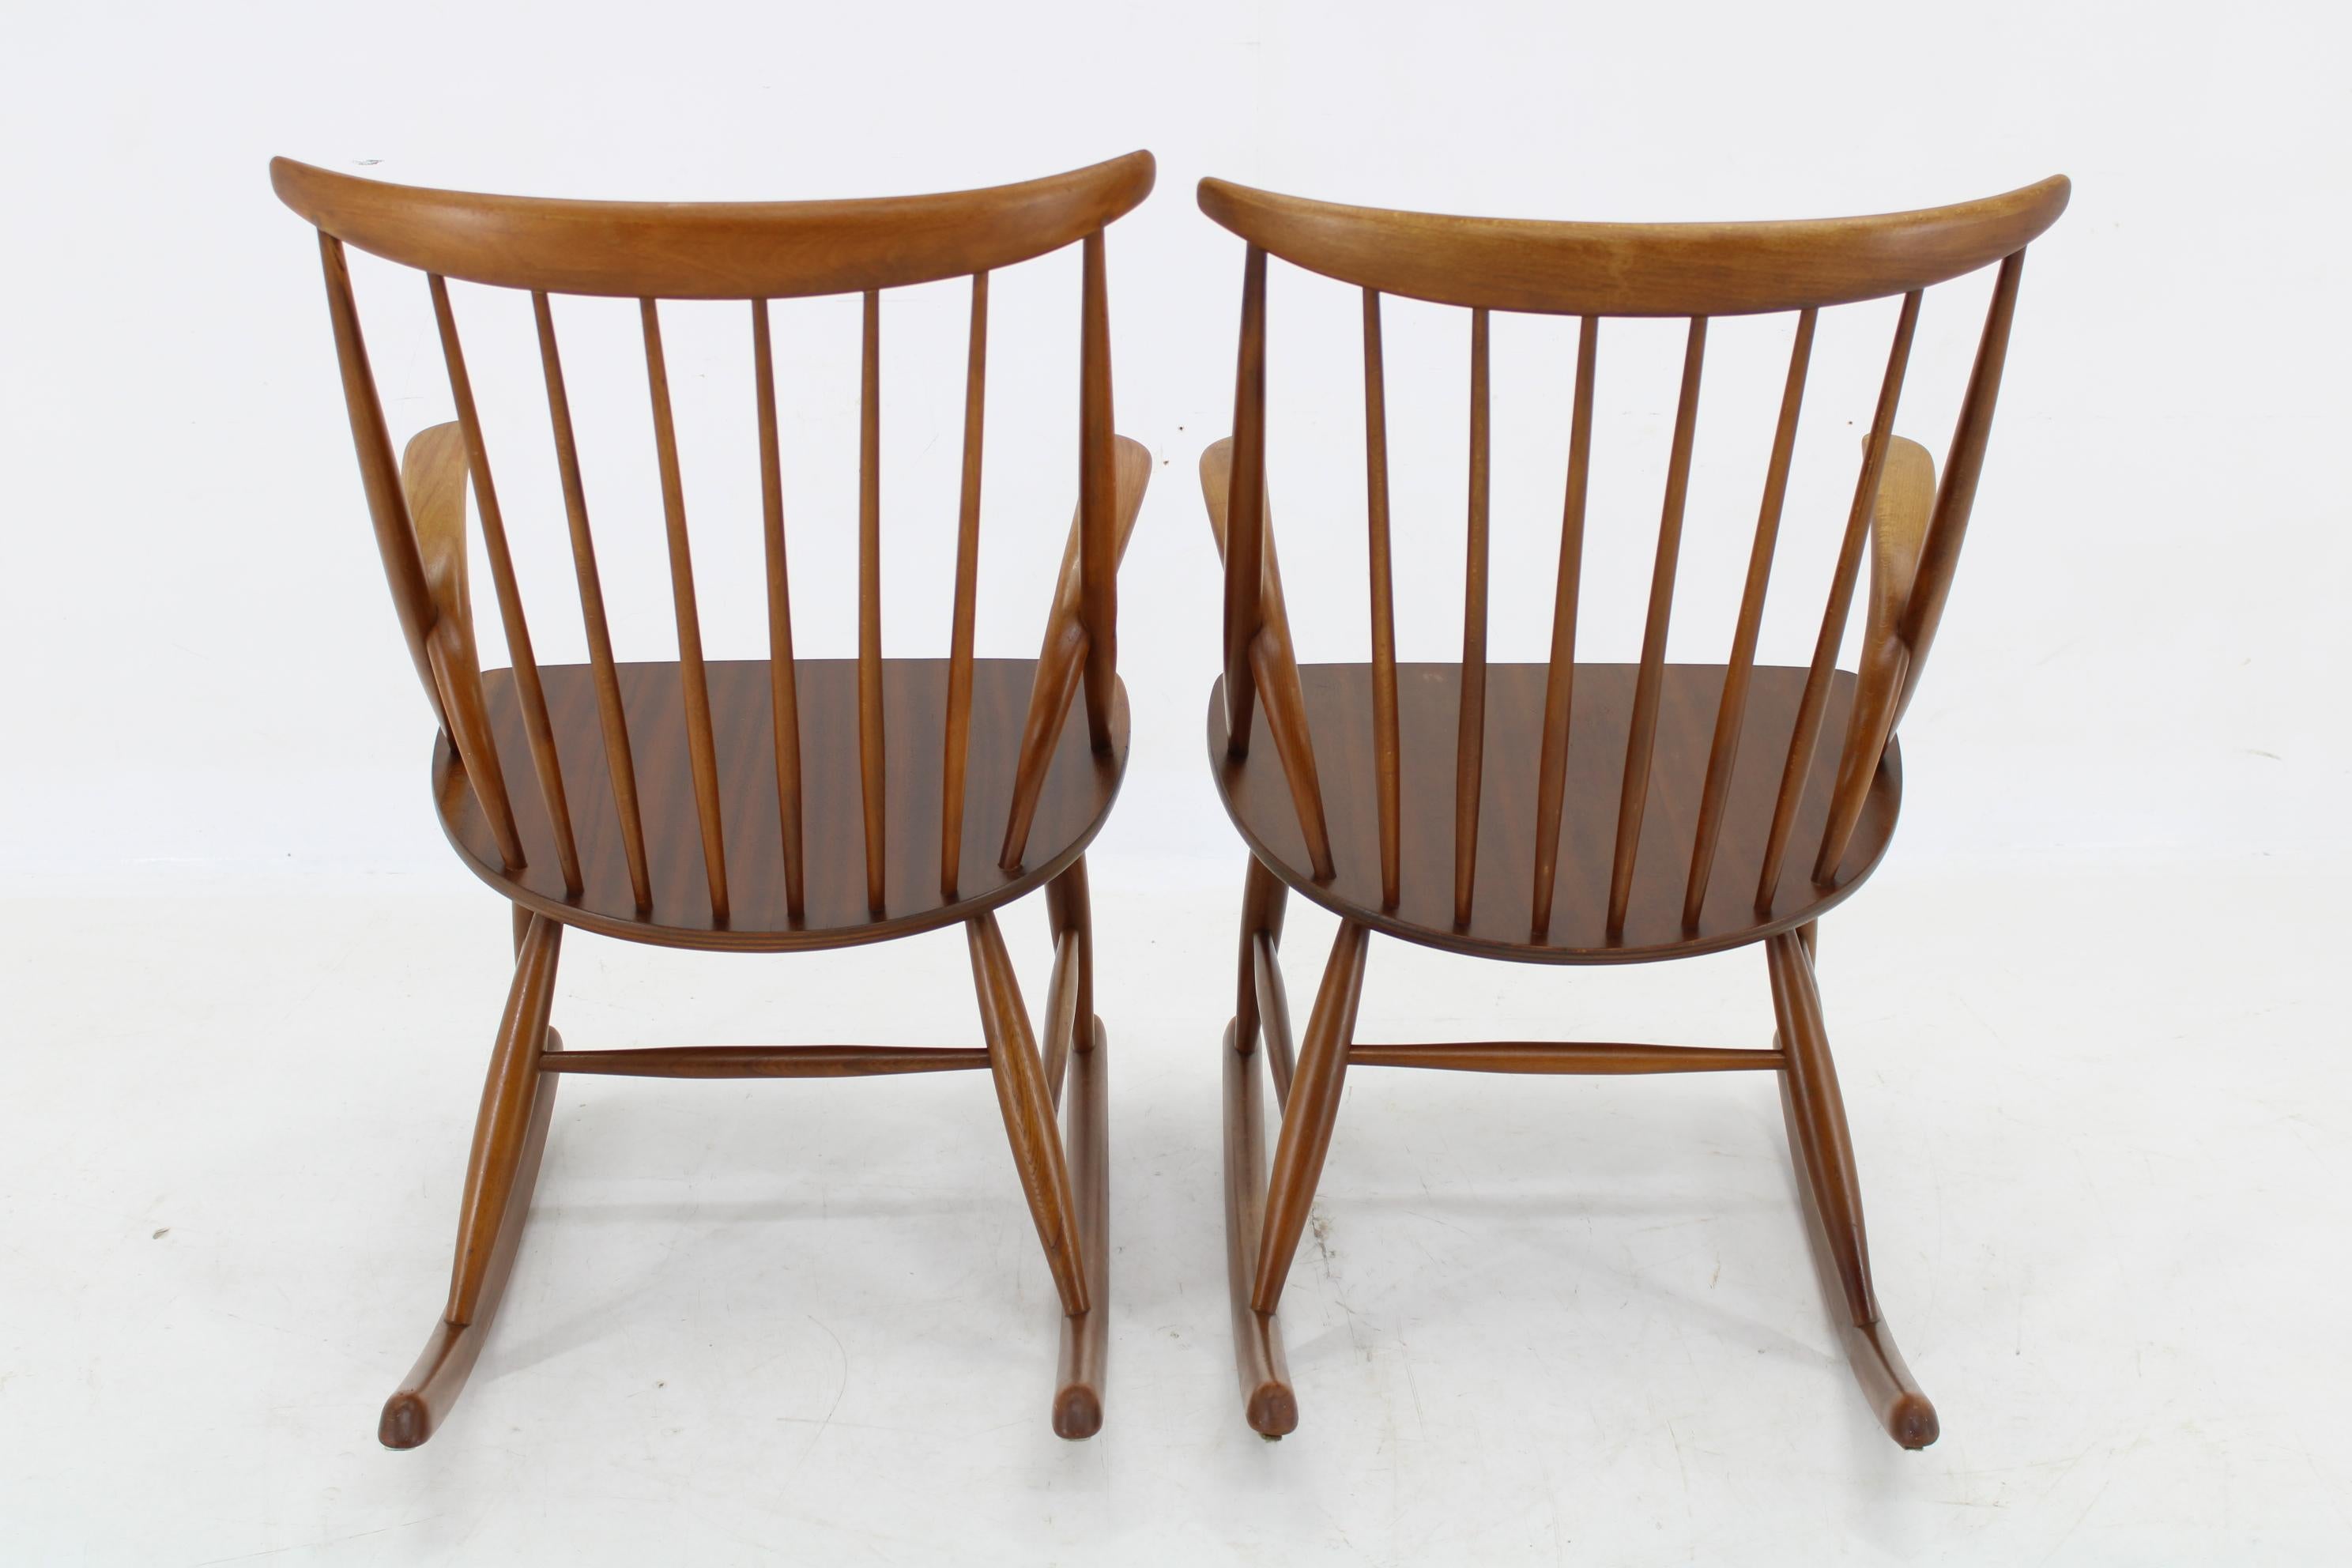 1960s Illum Wikkelso Gyngestol No. 3 Rocking Chair for Niels Eilersen, 2 items a For Sale 1